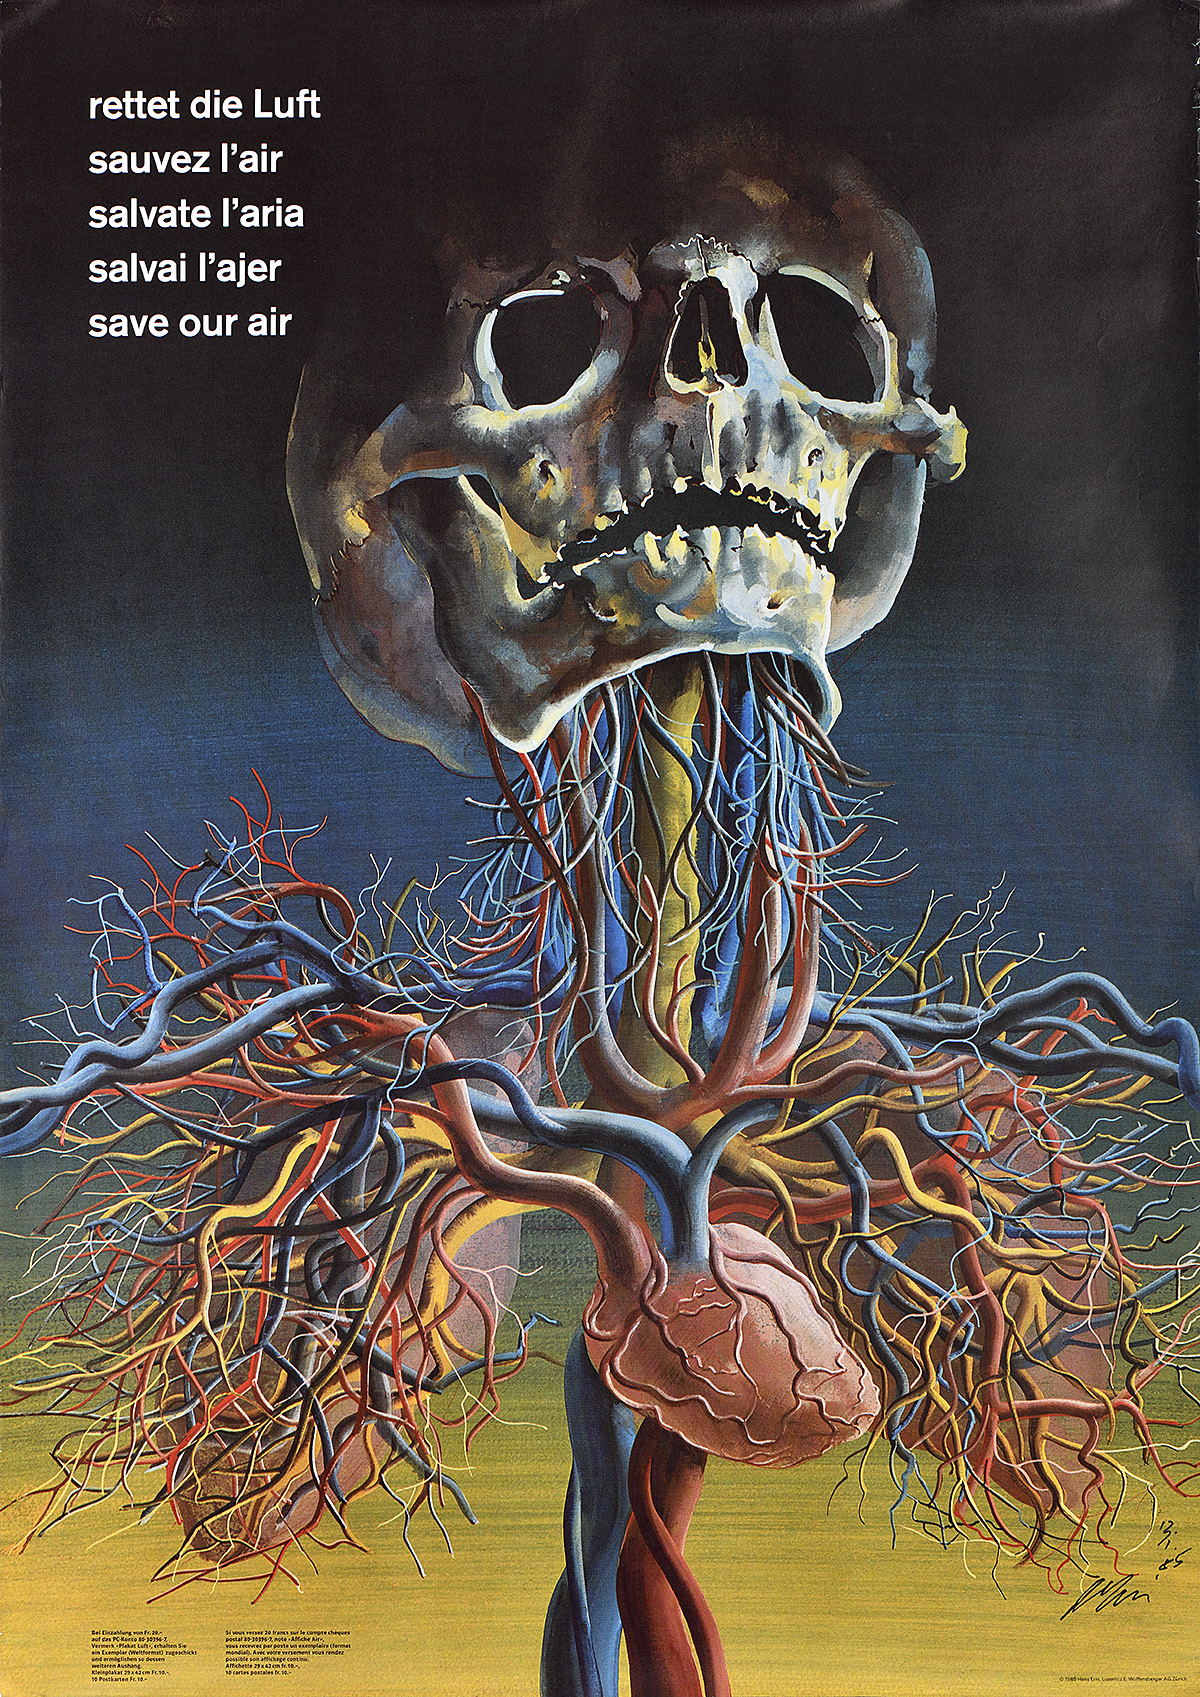 A poster of a skull with its arteries exposed against a blue and yellow background.